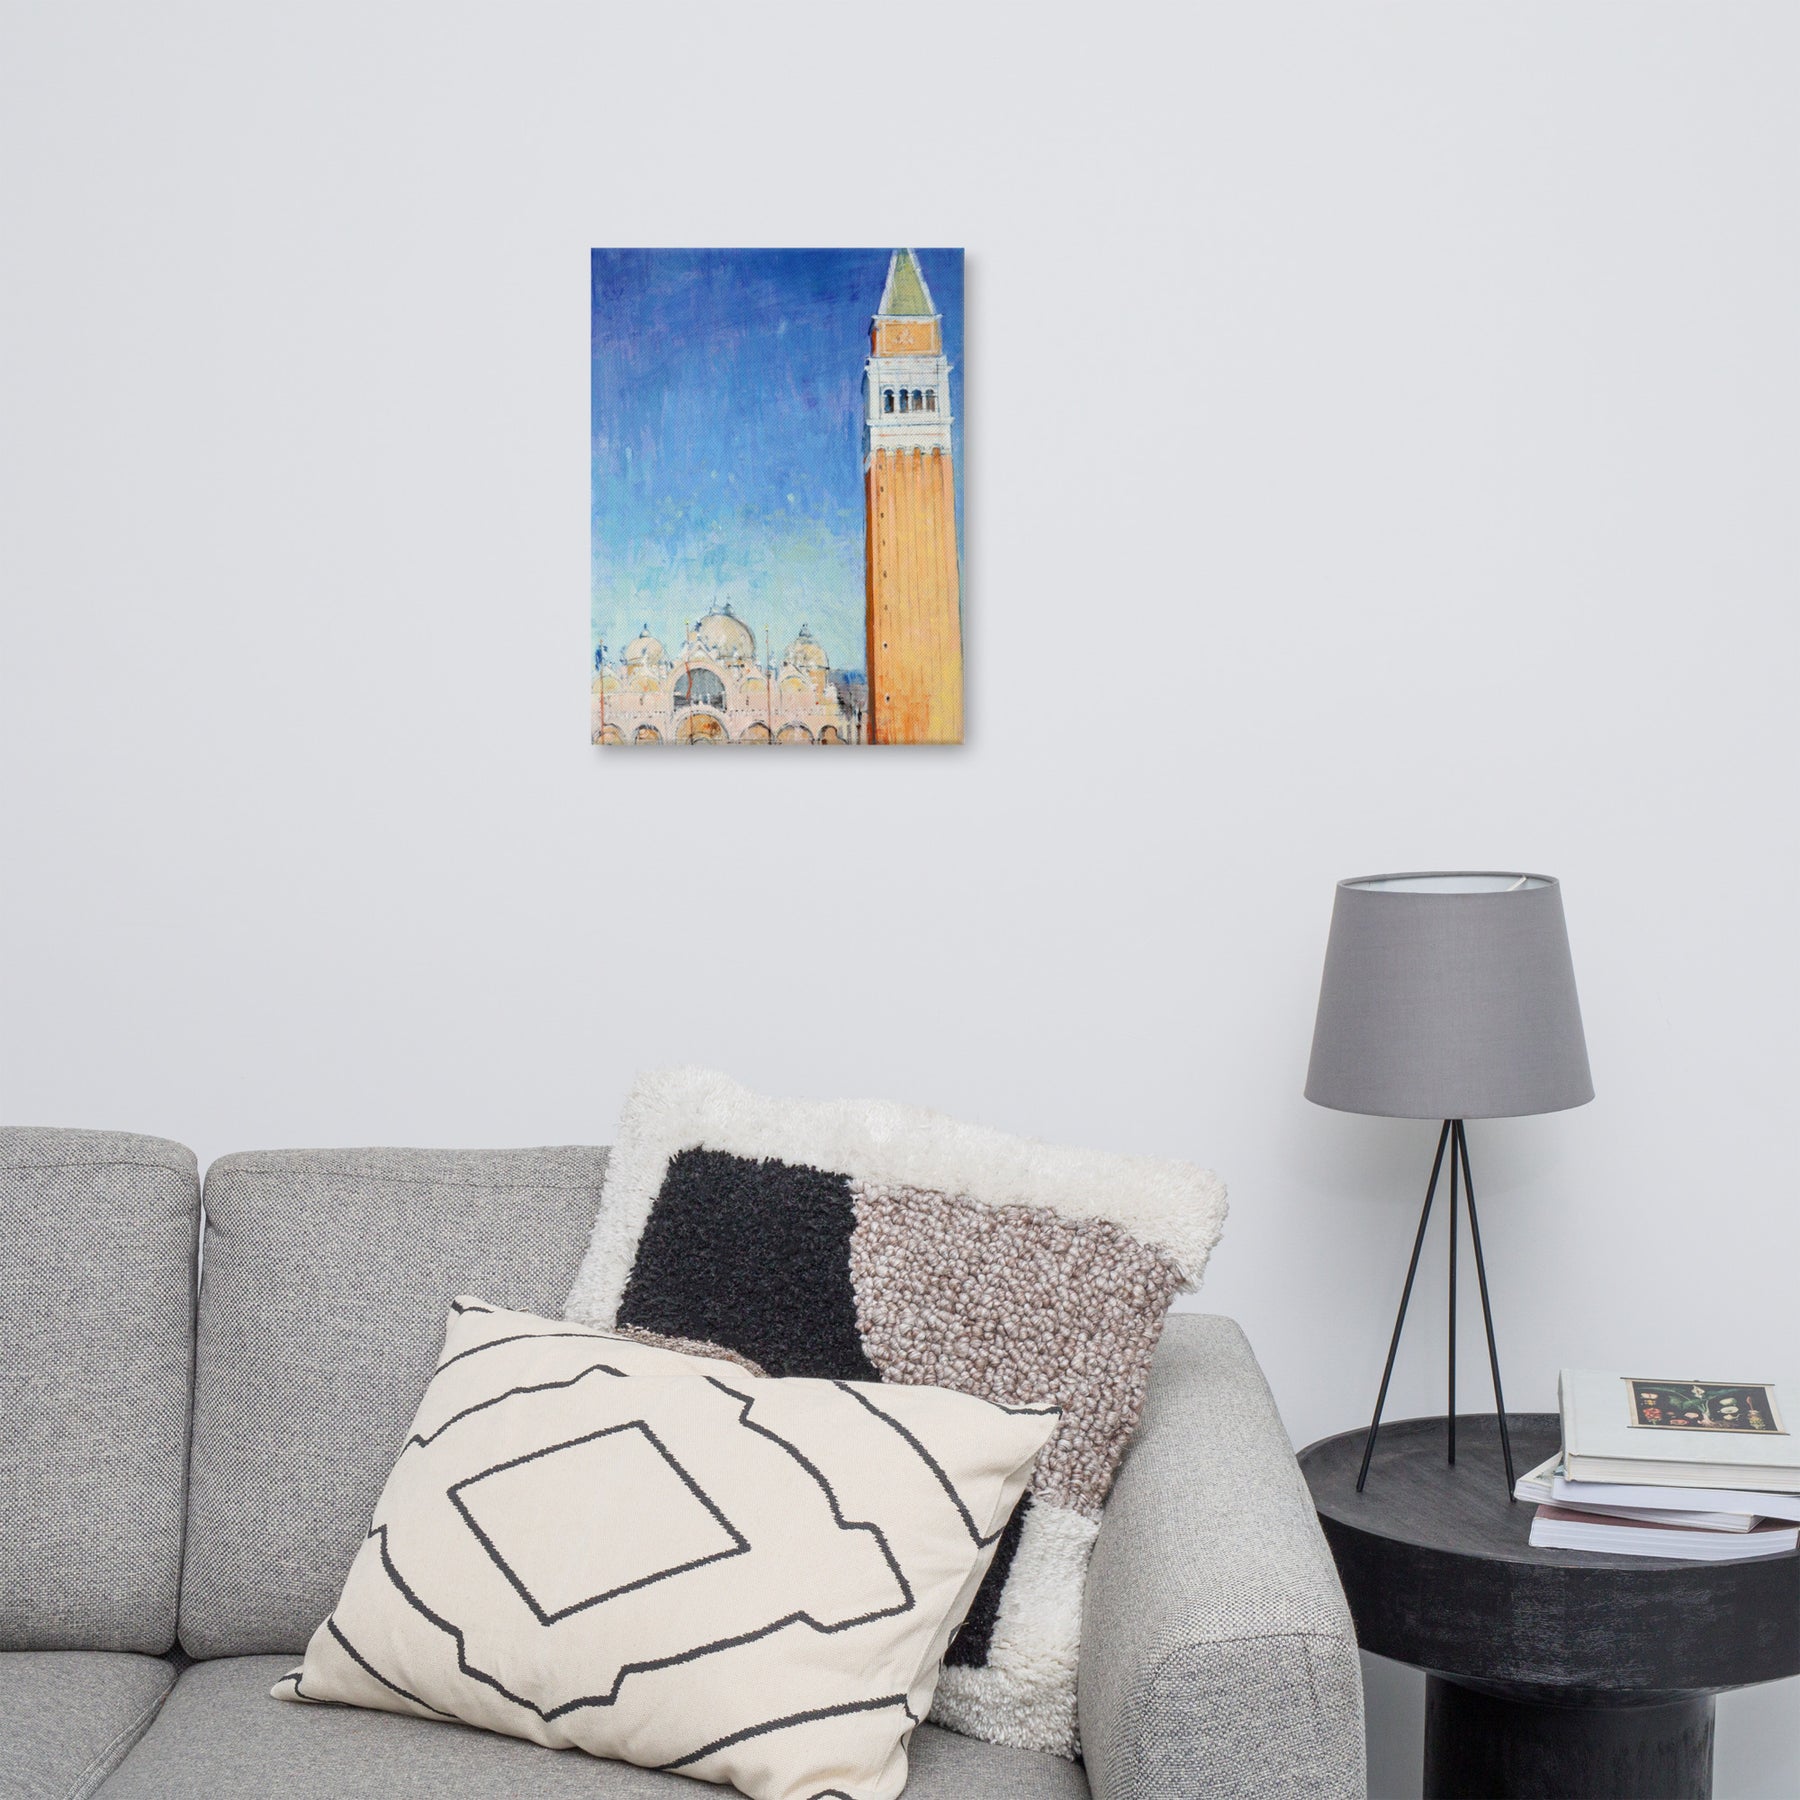 San Marco Campanile - Author's reproduction on canvas